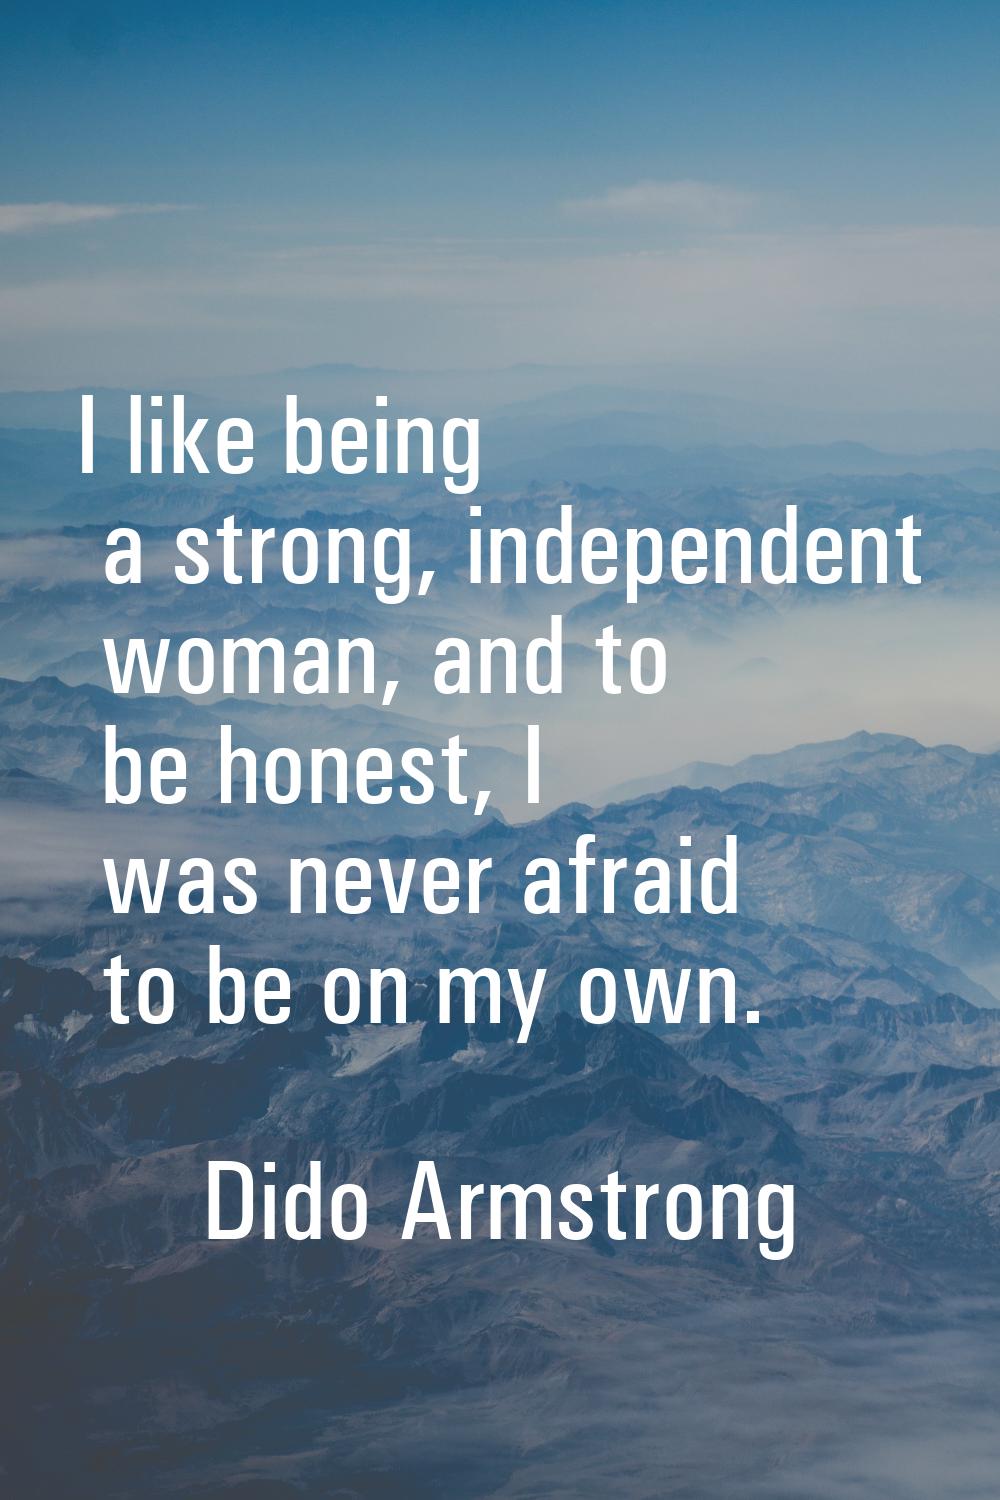 I like being a strong, independent woman, and to be honest, I was never afraid to be on my own.